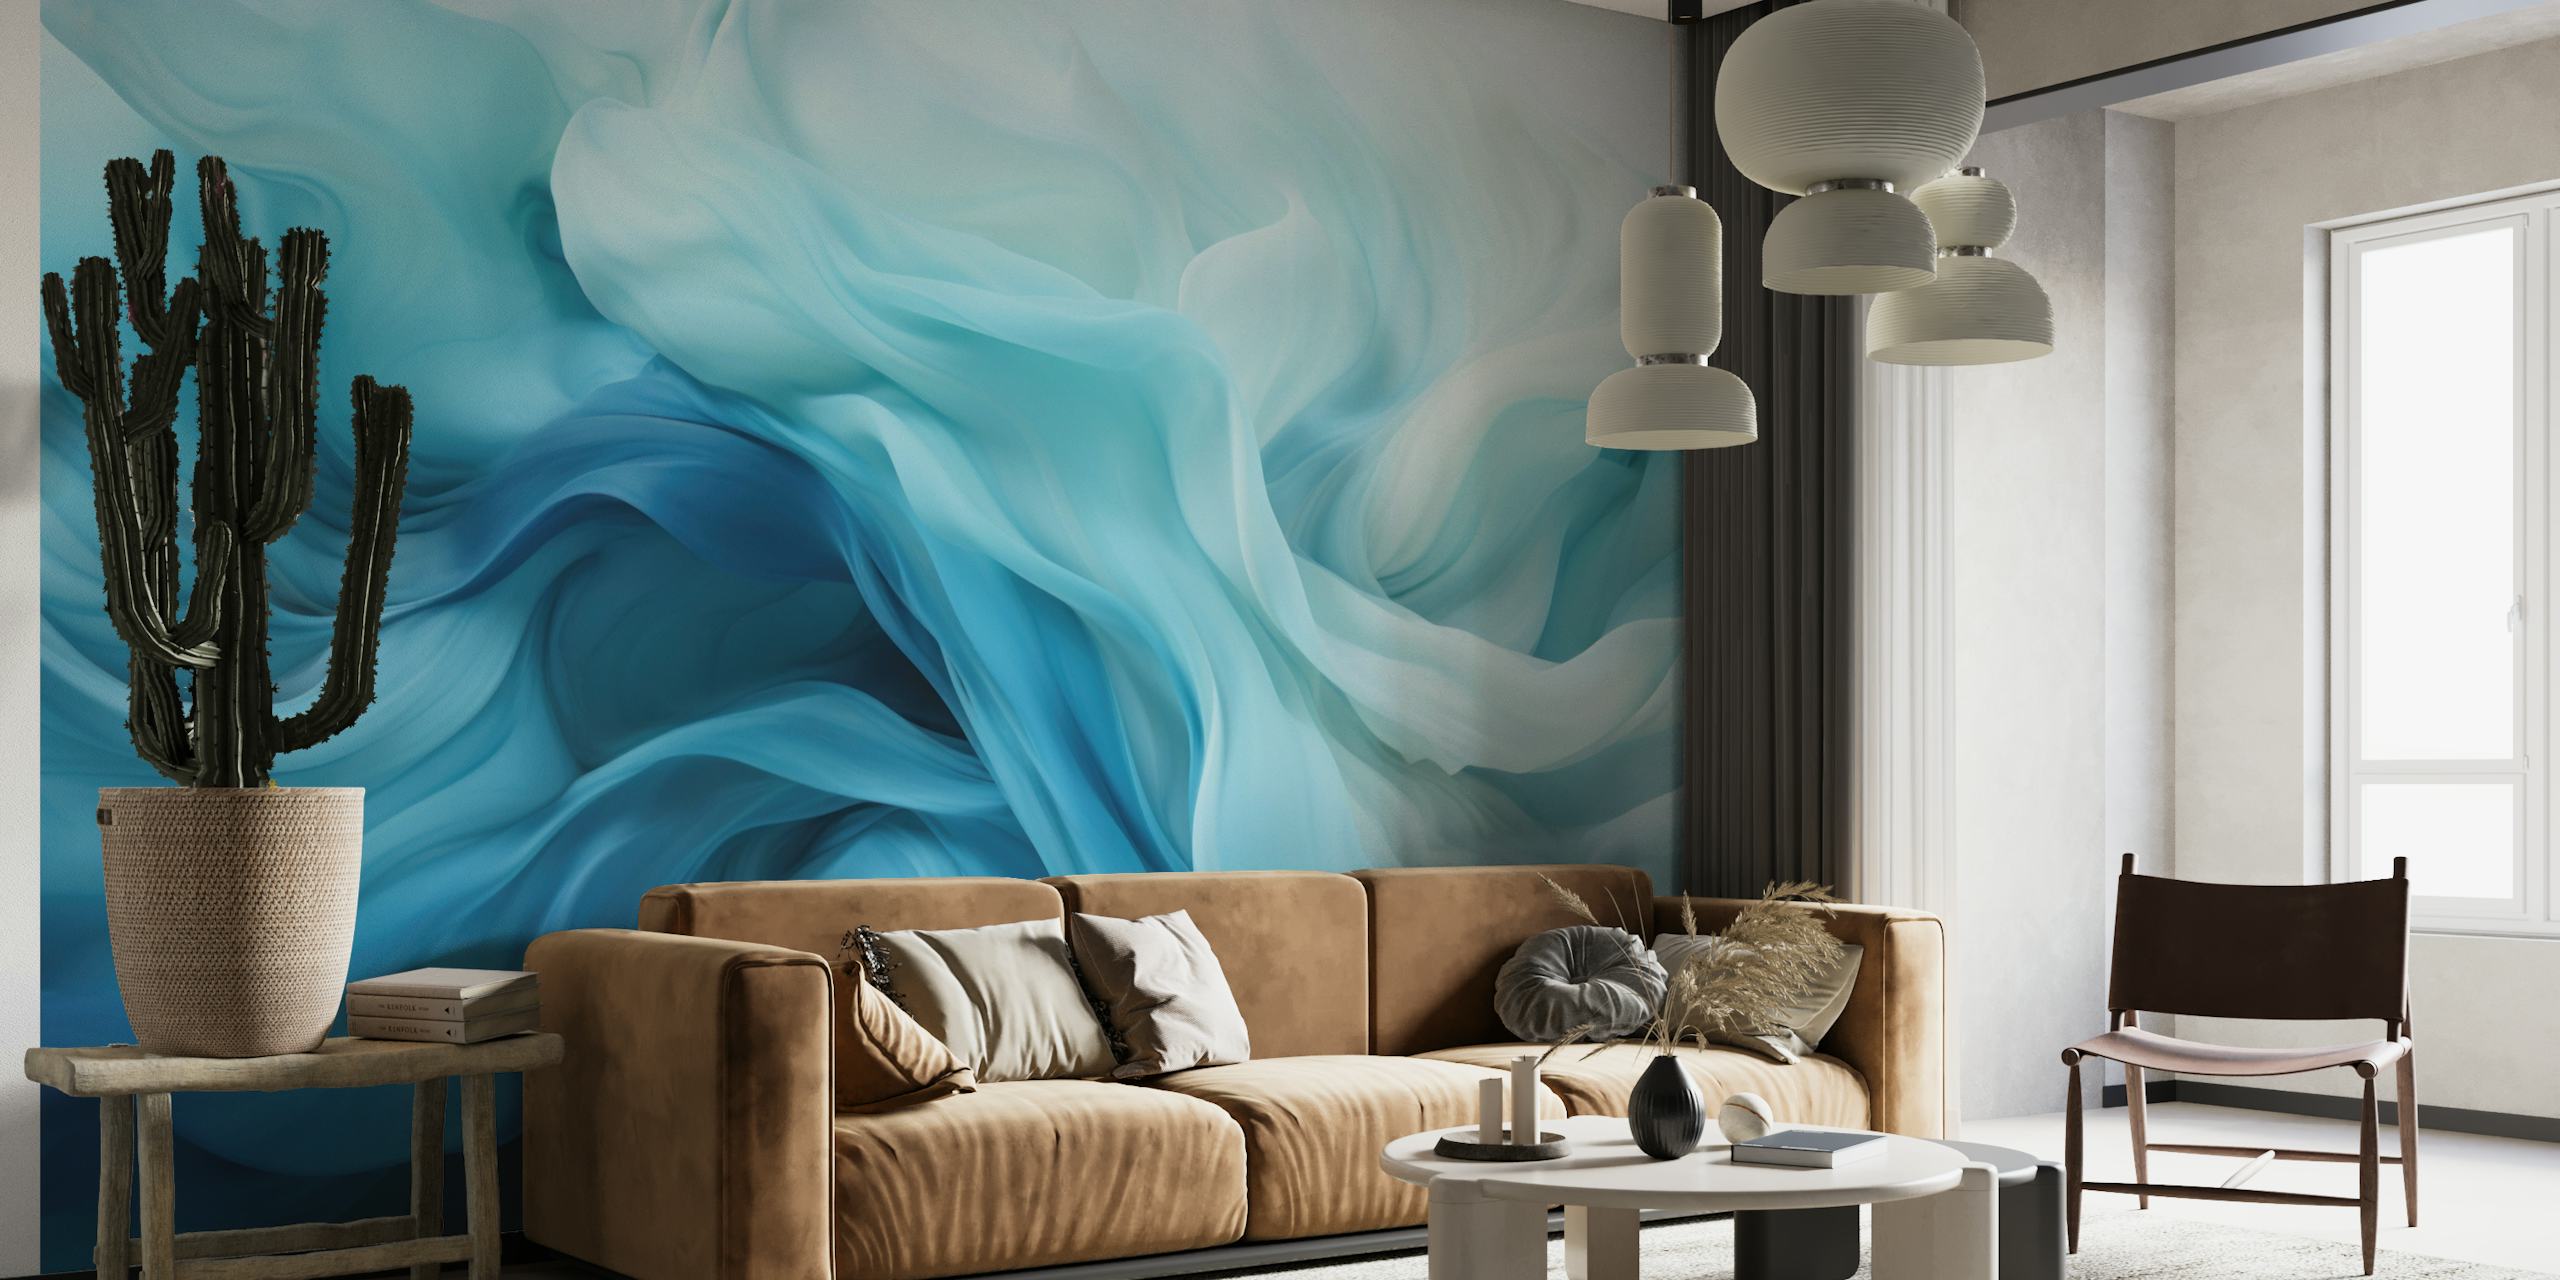 Abstract soft blue and white fluid wall mural